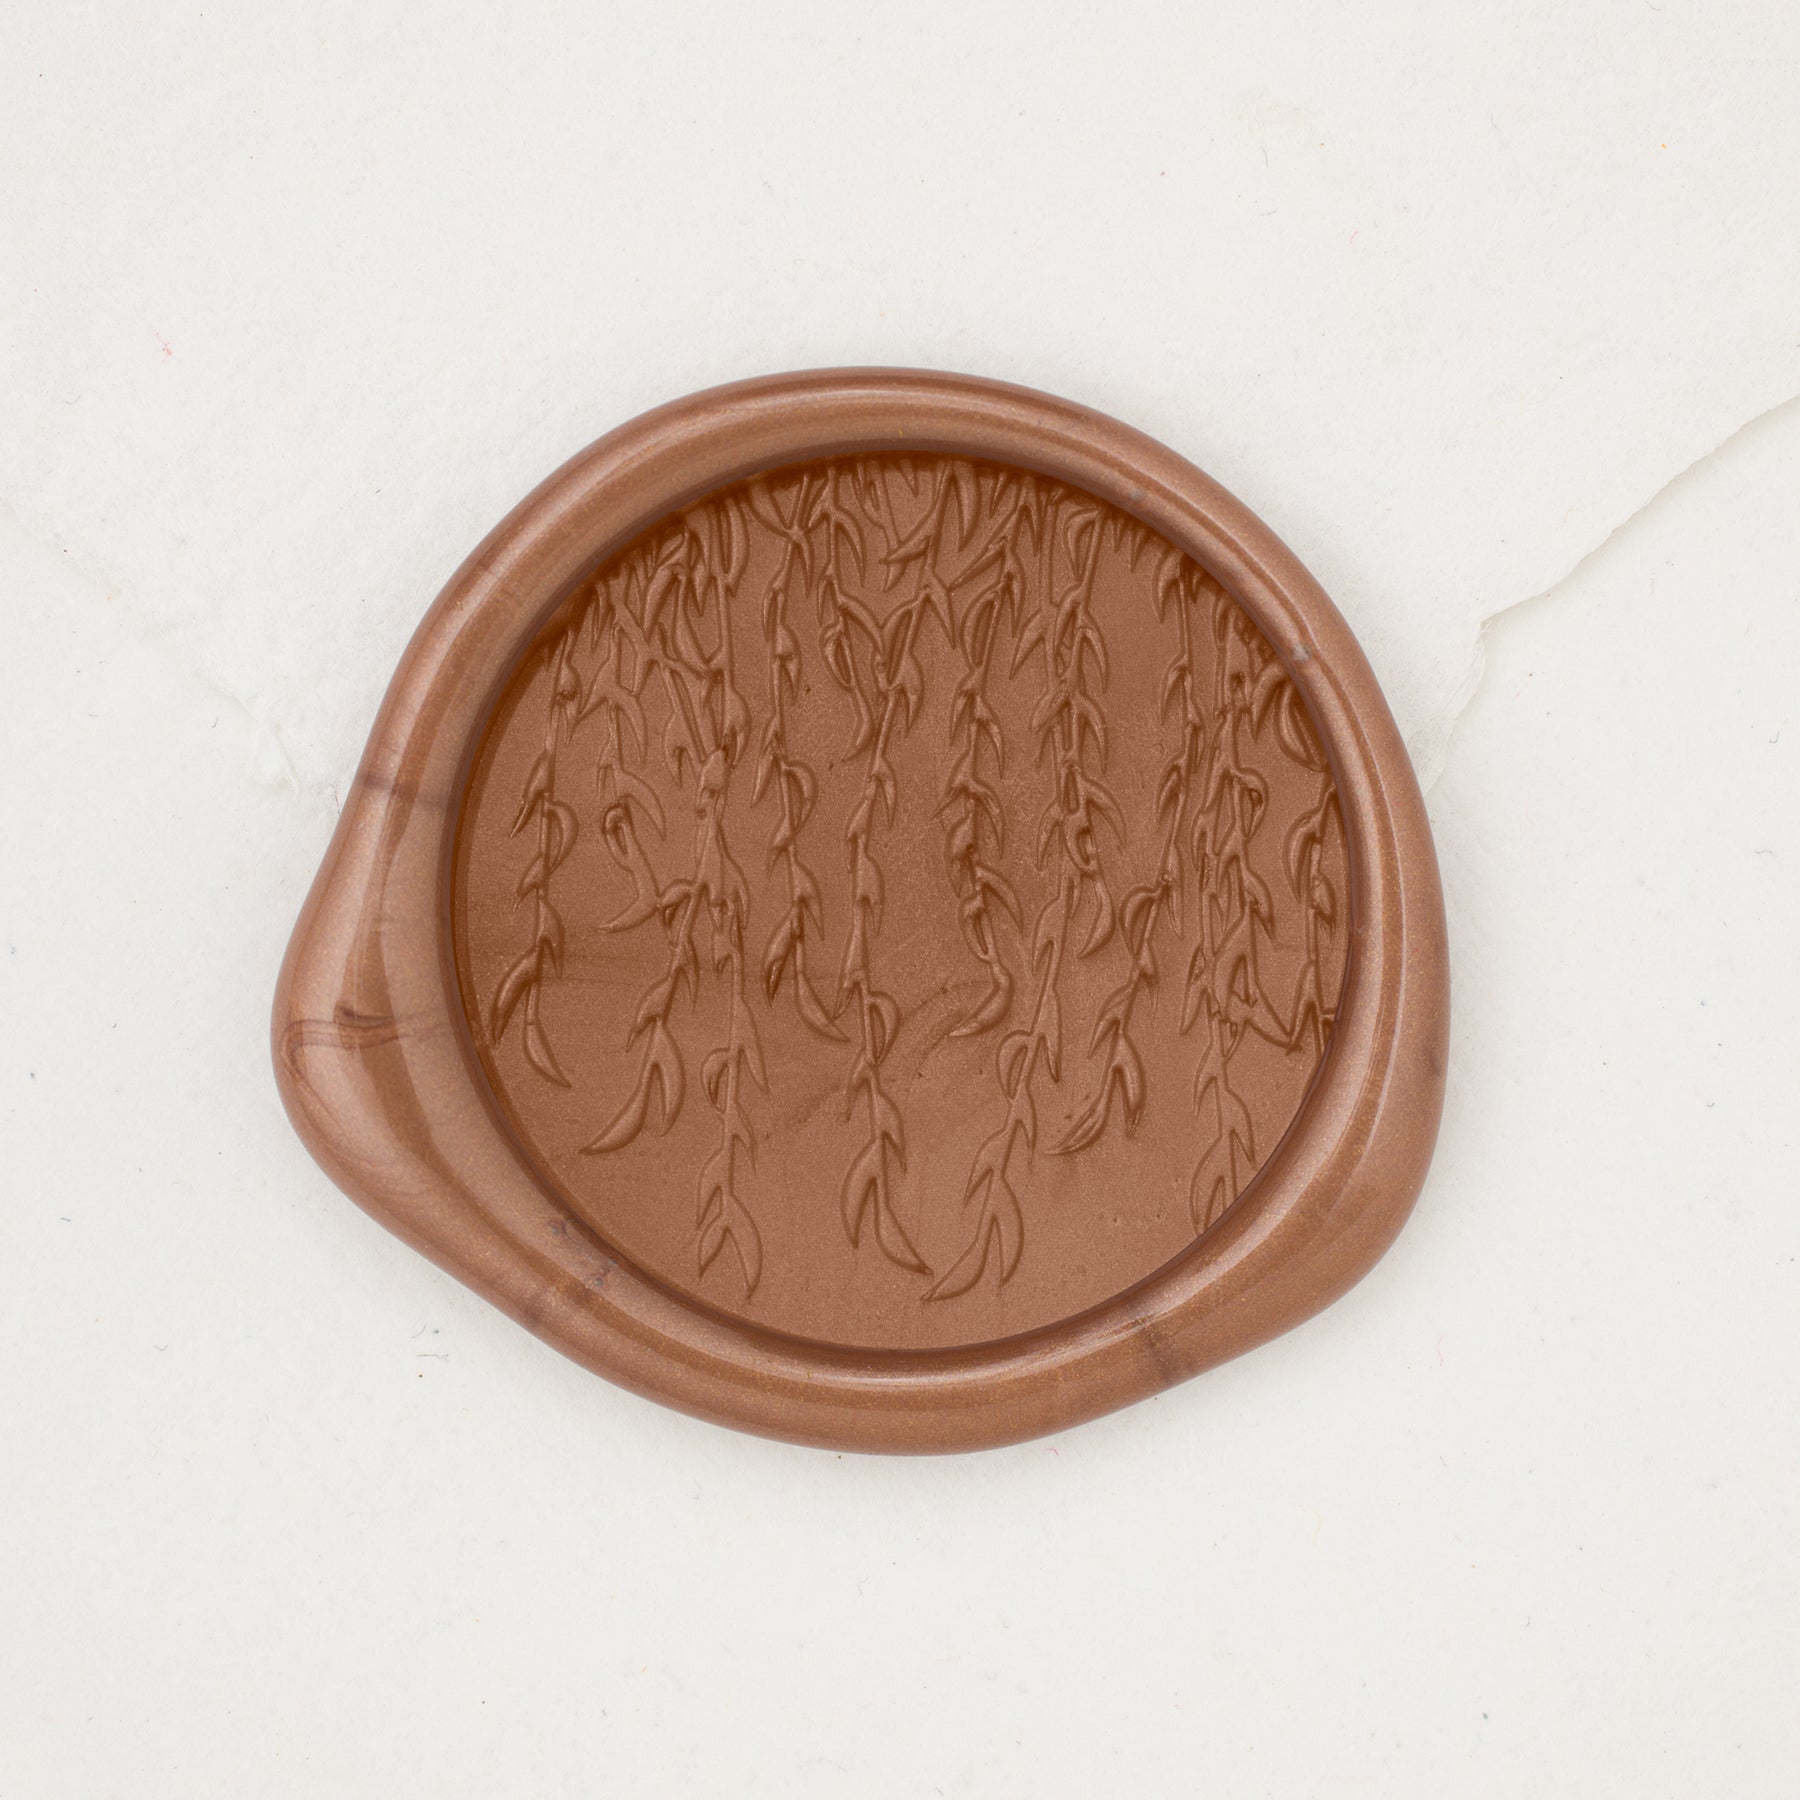 History of Wax Seals – Willow & Birch Apothecary